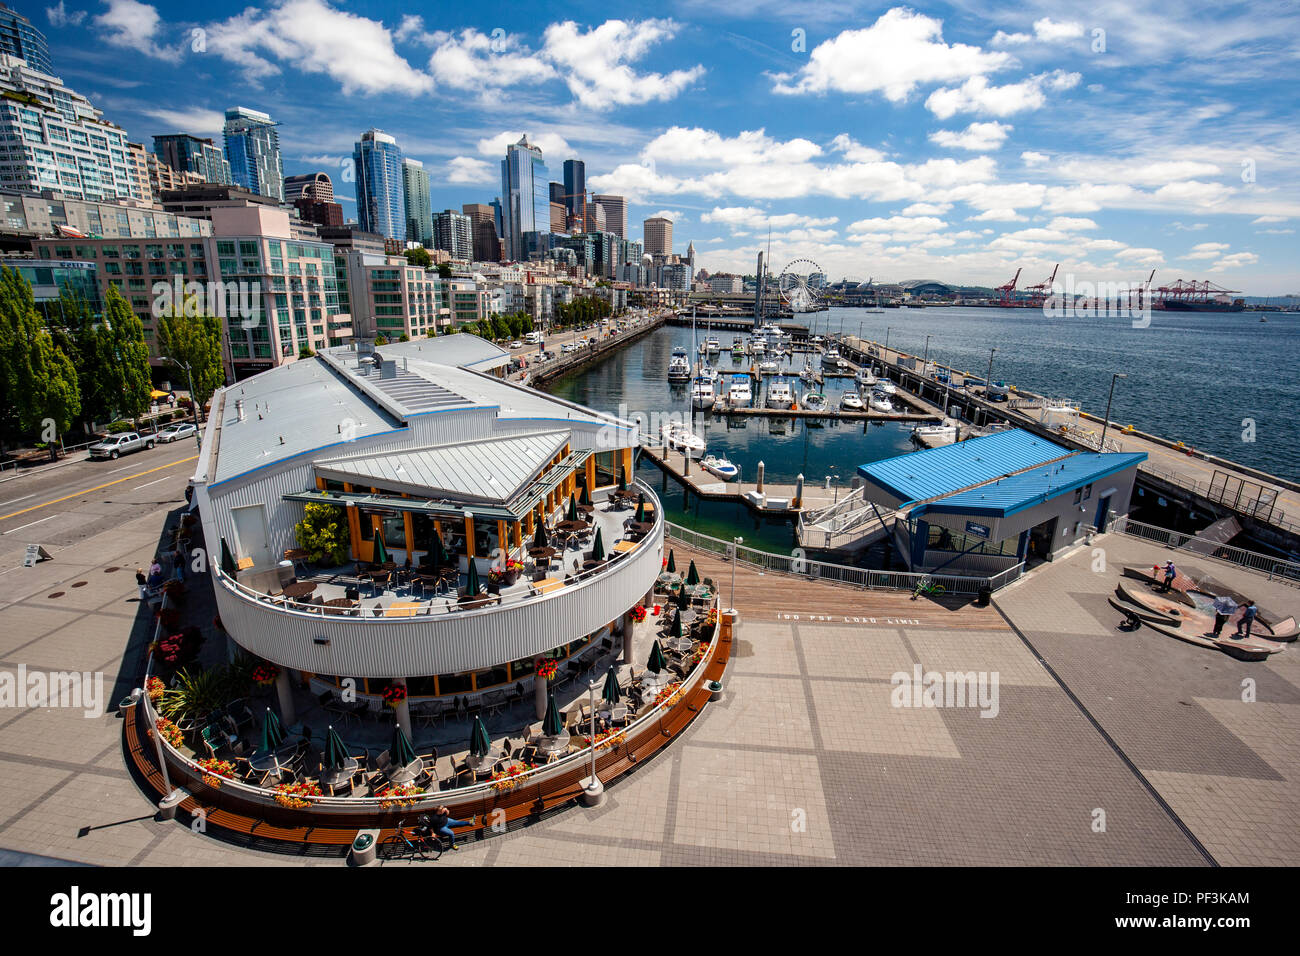 View of Seattle's Waterfront from Bell Street Pier and Conference Center at Pier 66 - Seattle, Washington, USA Stock Photo